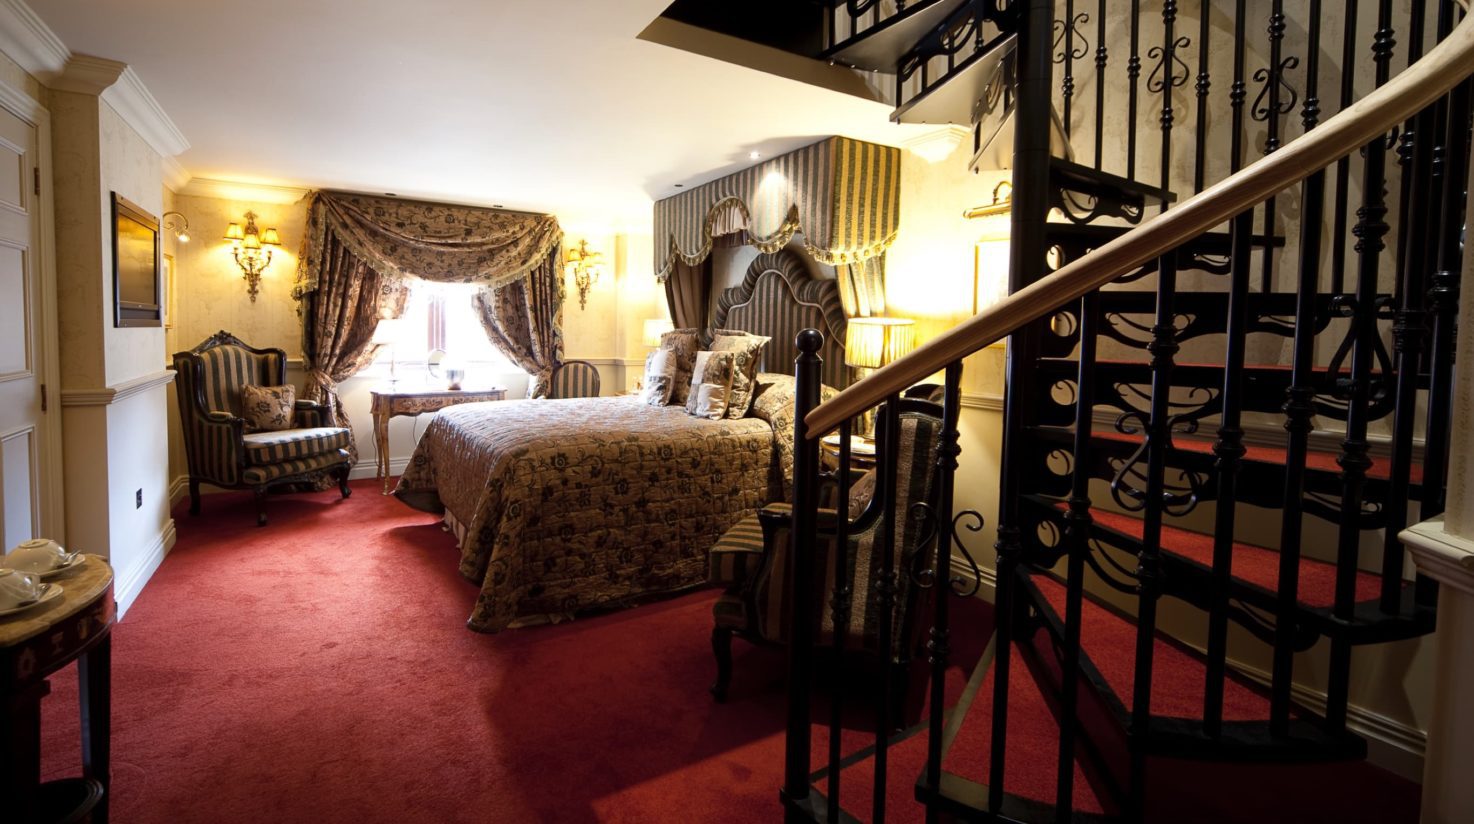 Dudley Room at Coombe Abbey Hotel